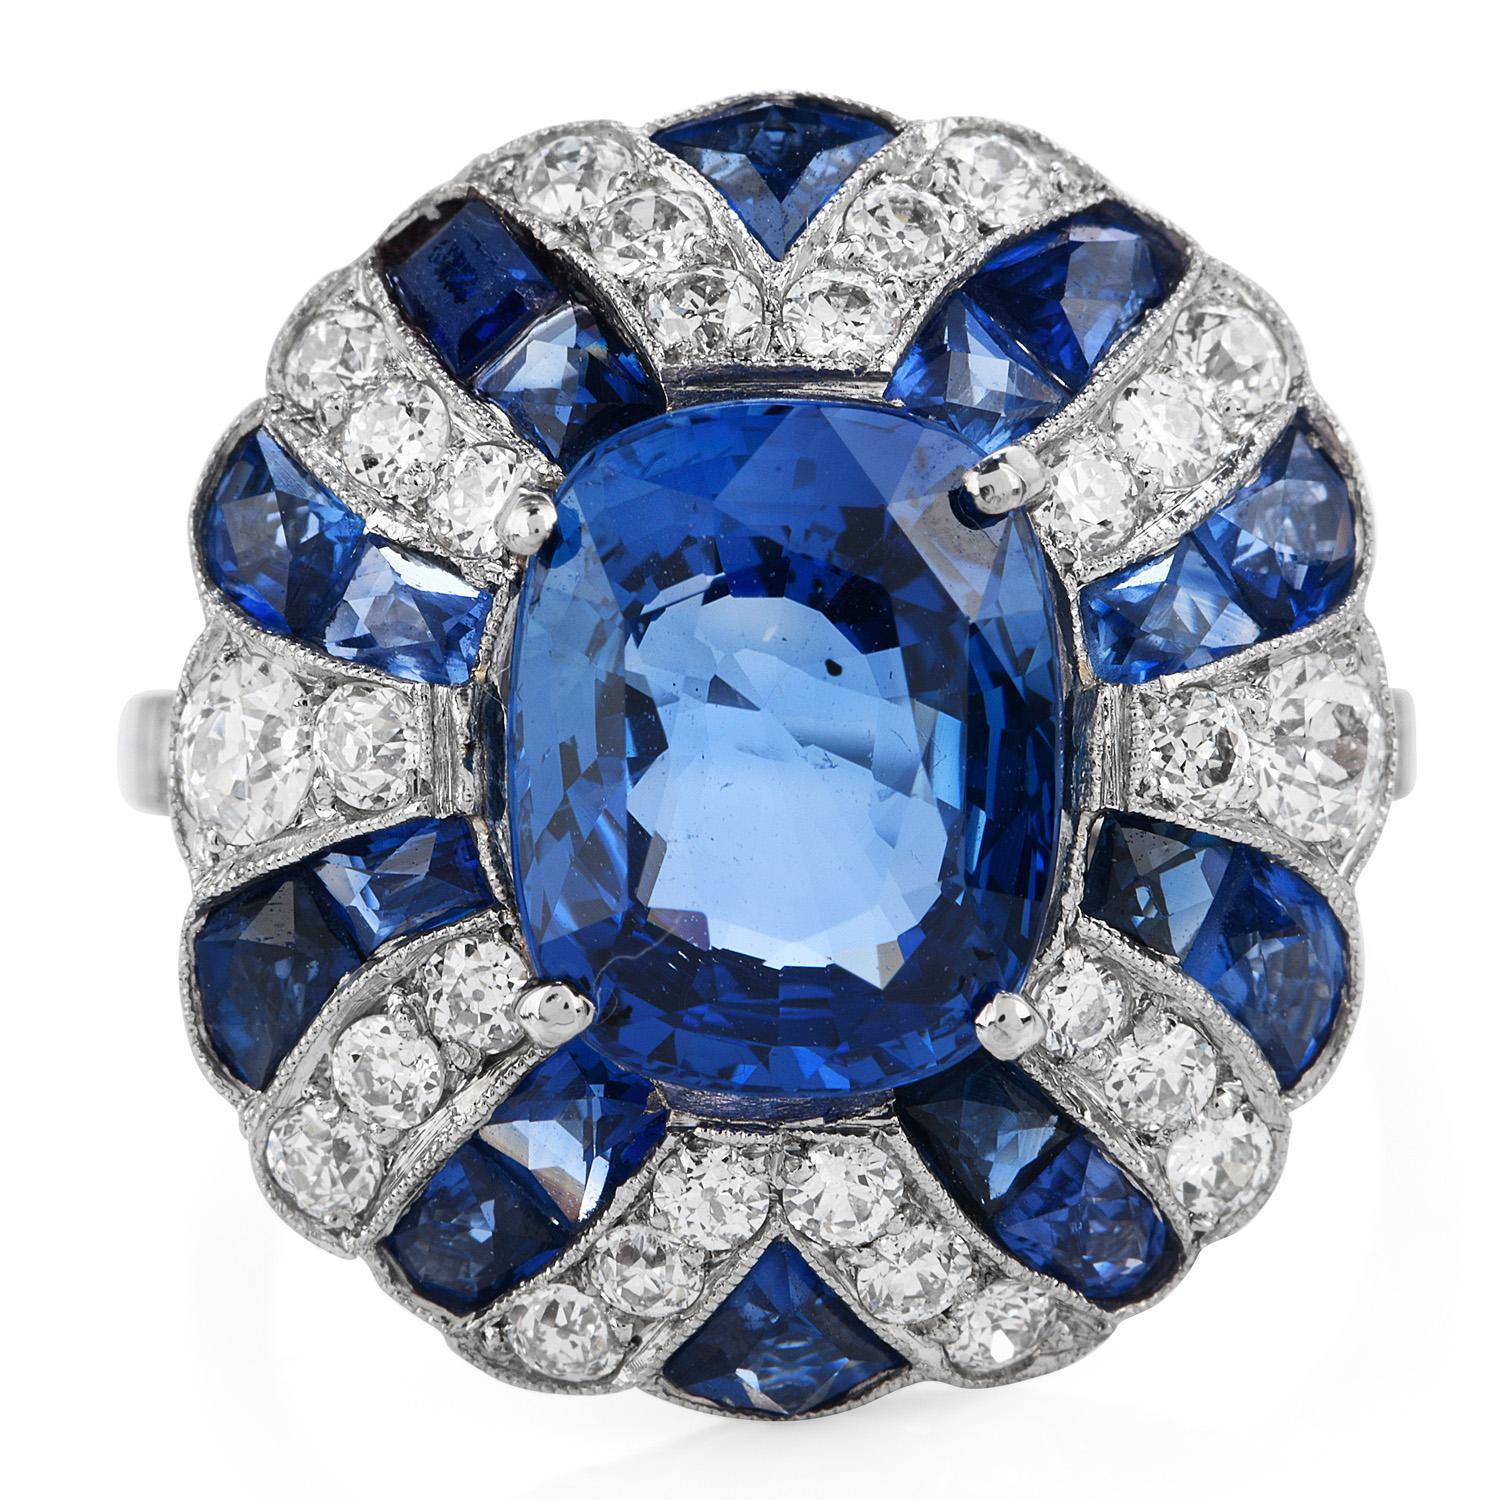 Feminine and elegant, this GIA-certified diamond and sapphire ring is the perfect addition to your collection.

Crafted in platinum, the center stone is a natural cushion-cut sapphire of approximately 3.74 carats. 

Accenting the focal point are